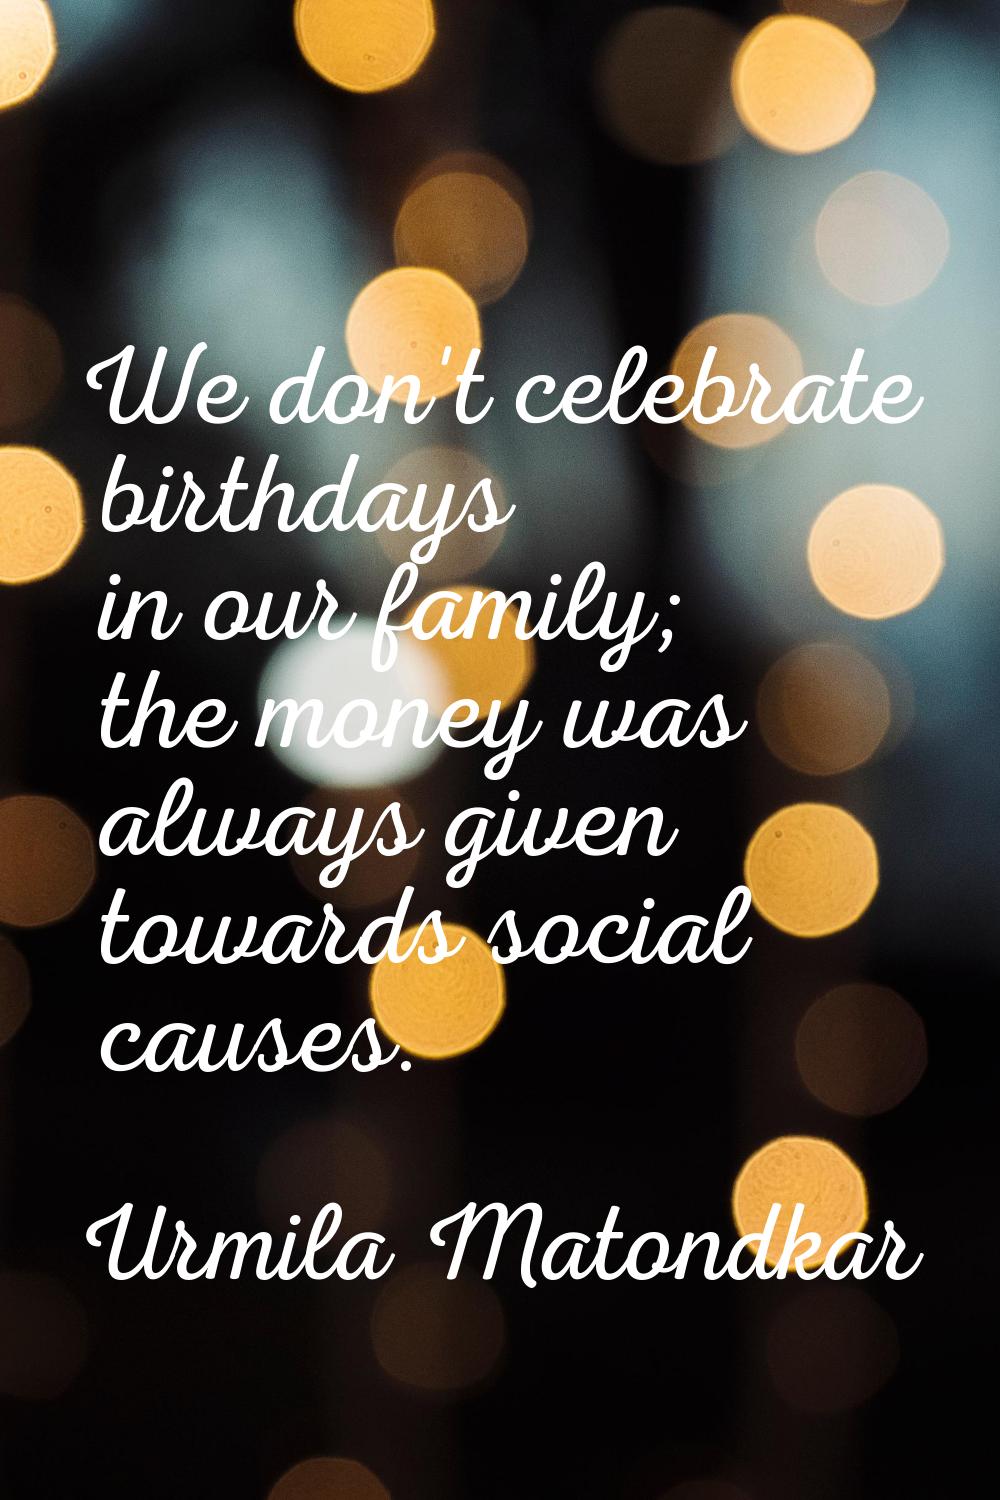 We don't celebrate birthdays in our family; the money was always given towards social causes.